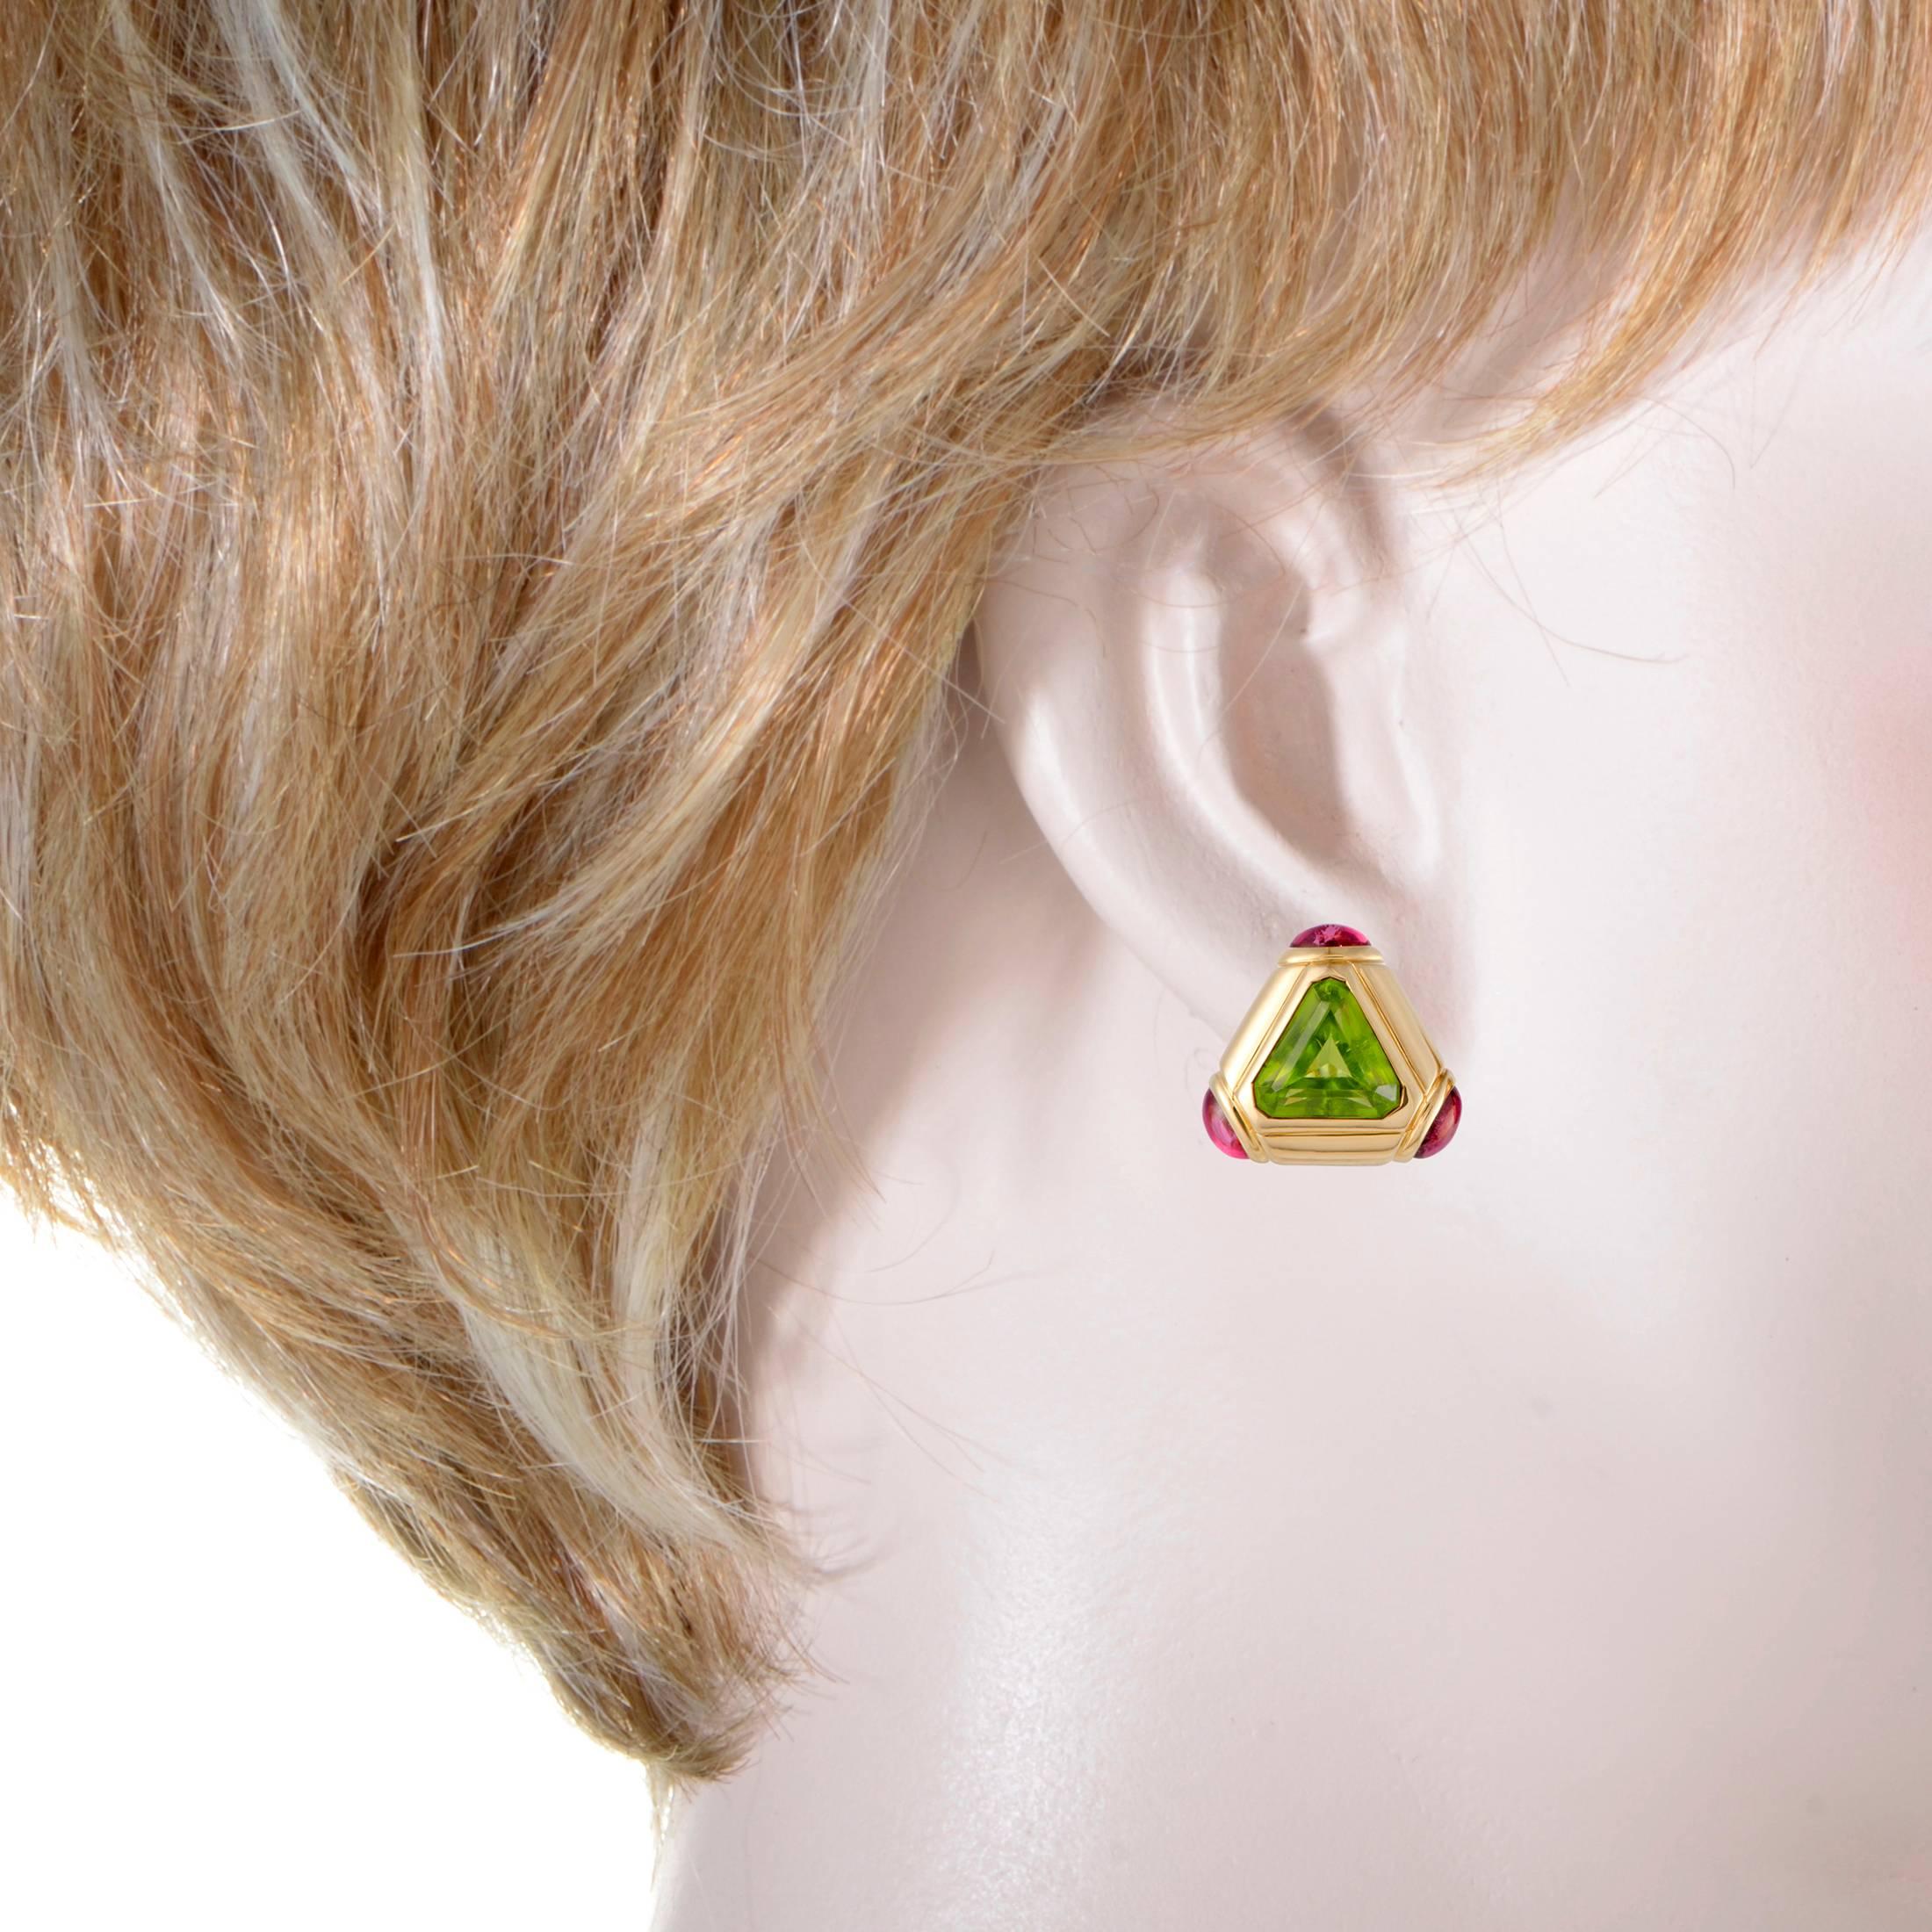 Intriguingly offbeat and incredibly fashionable, these stunning earrings designed by Bulgari offer an astonishingly eye-catching appearance. The pair is made of classy 18K yellow gold and decorated with striking peridot and pink tourmaline